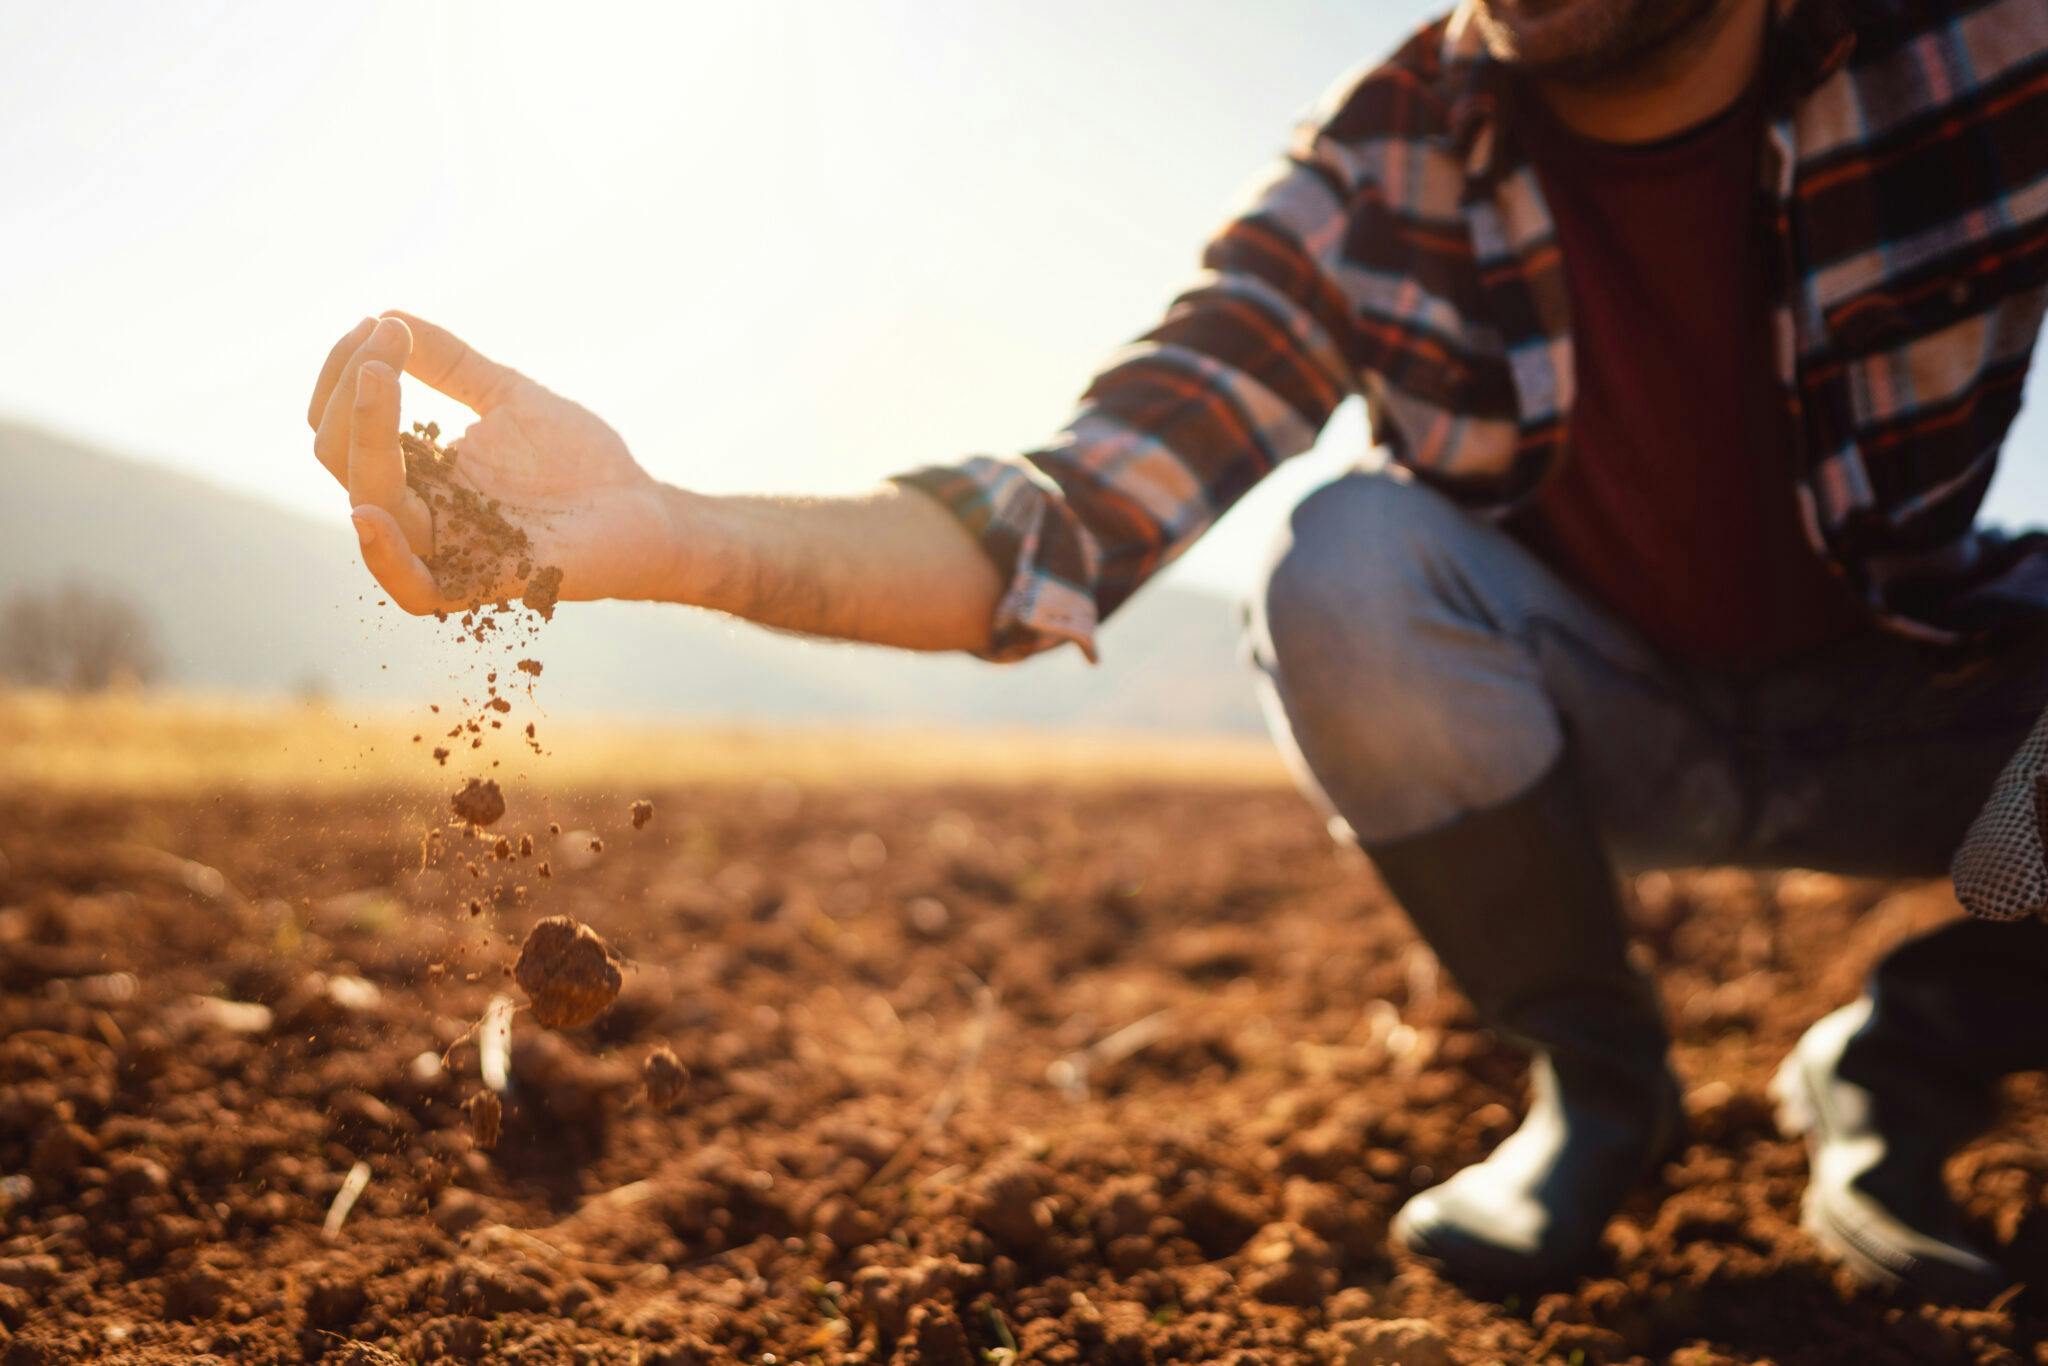 A farmer in a checkered shirt and rubber boots squatting down in a dirt field, holding soil in his hand and letting it fall to the ground